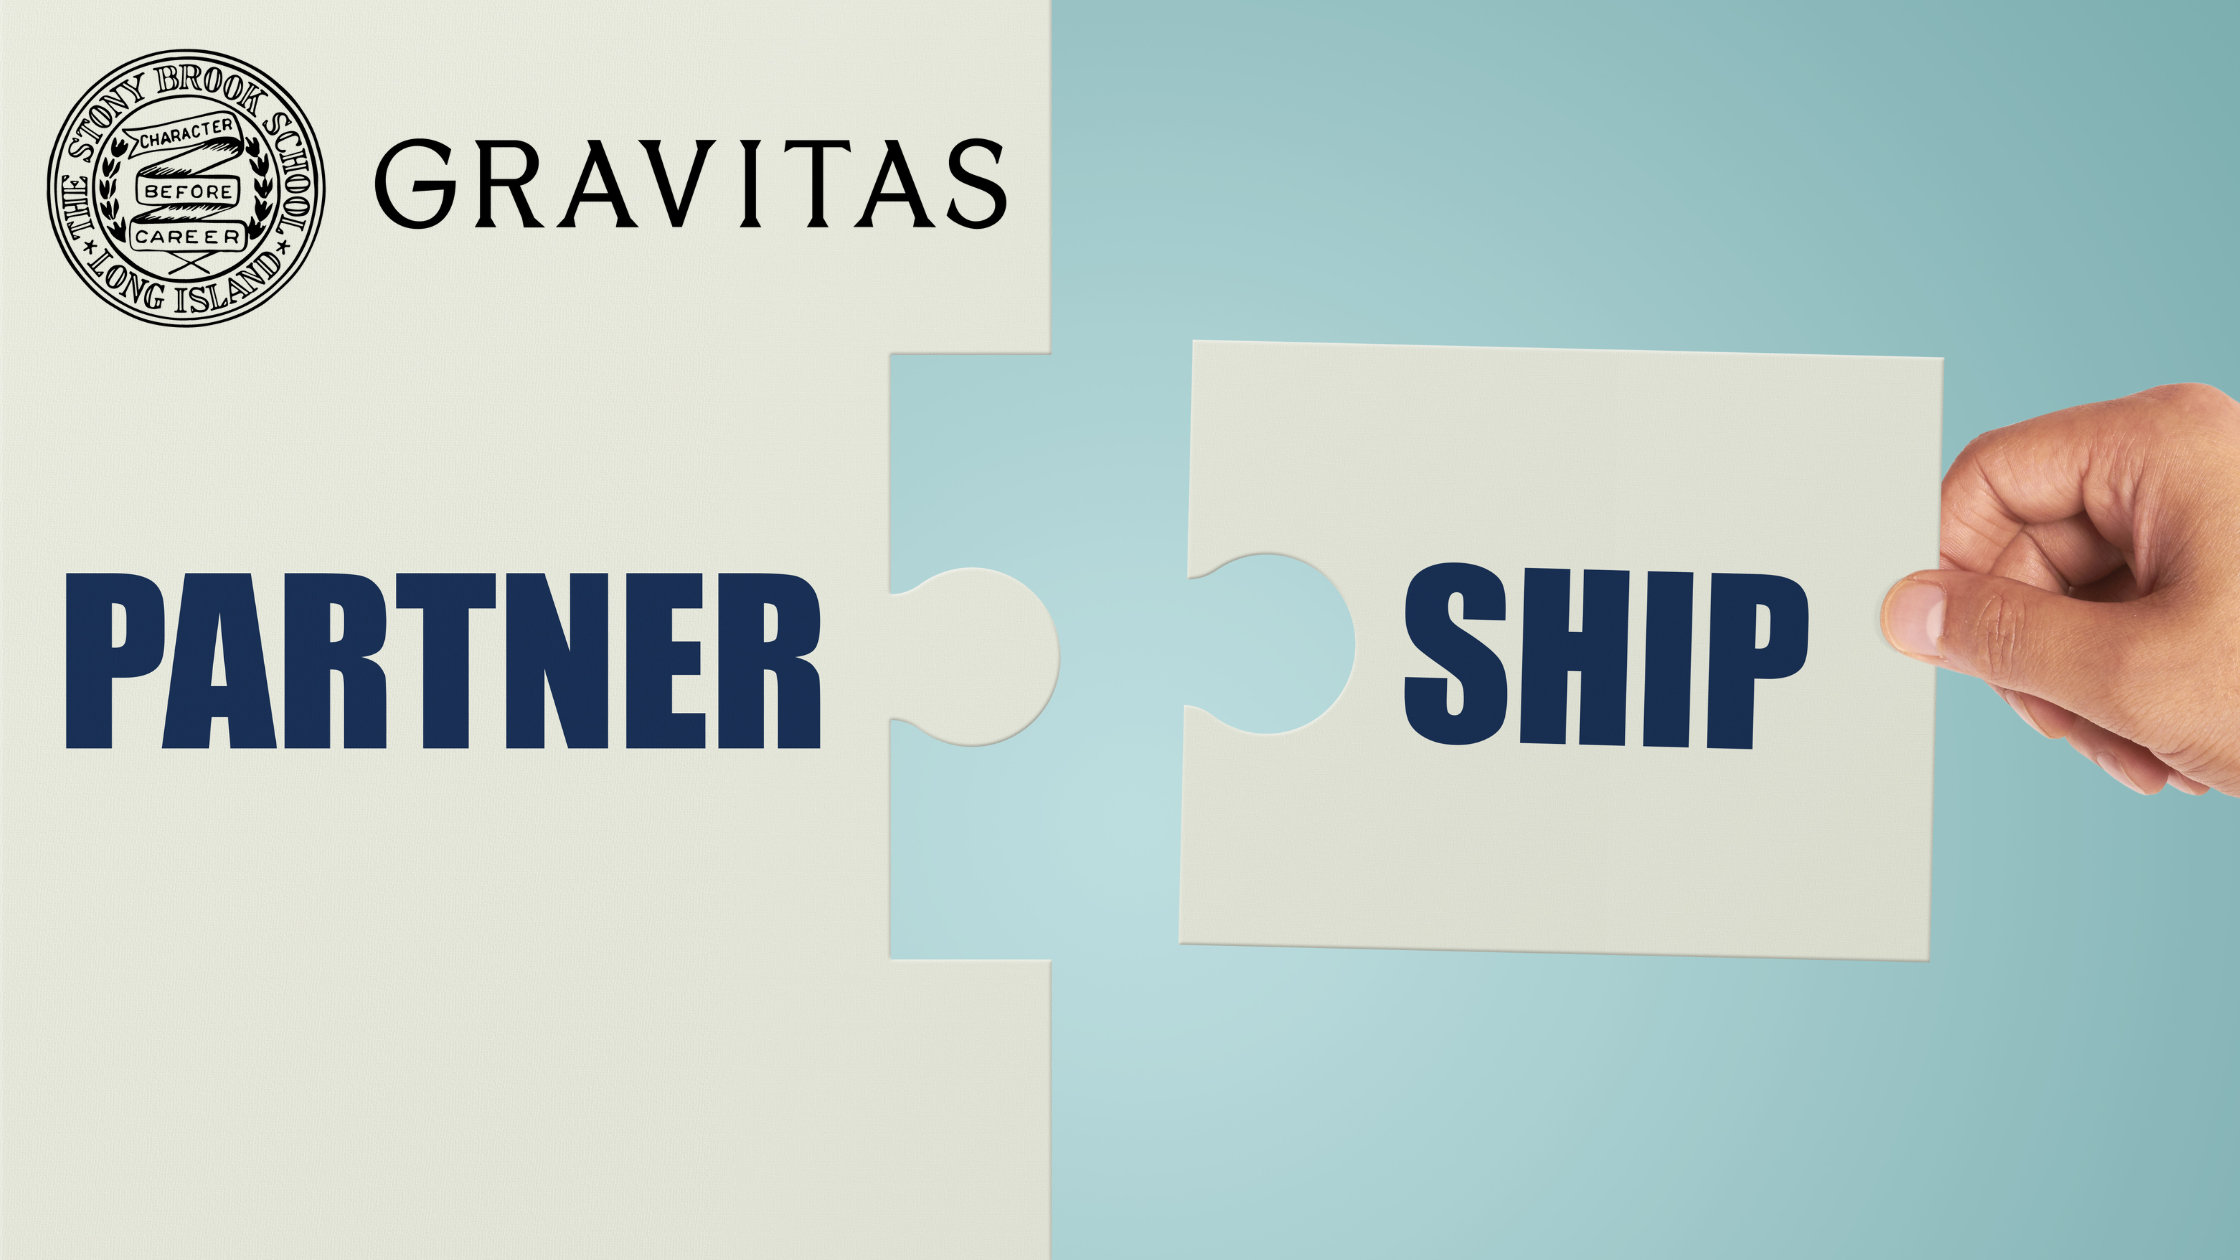 Partner with Gravitas to Offer Your Students More